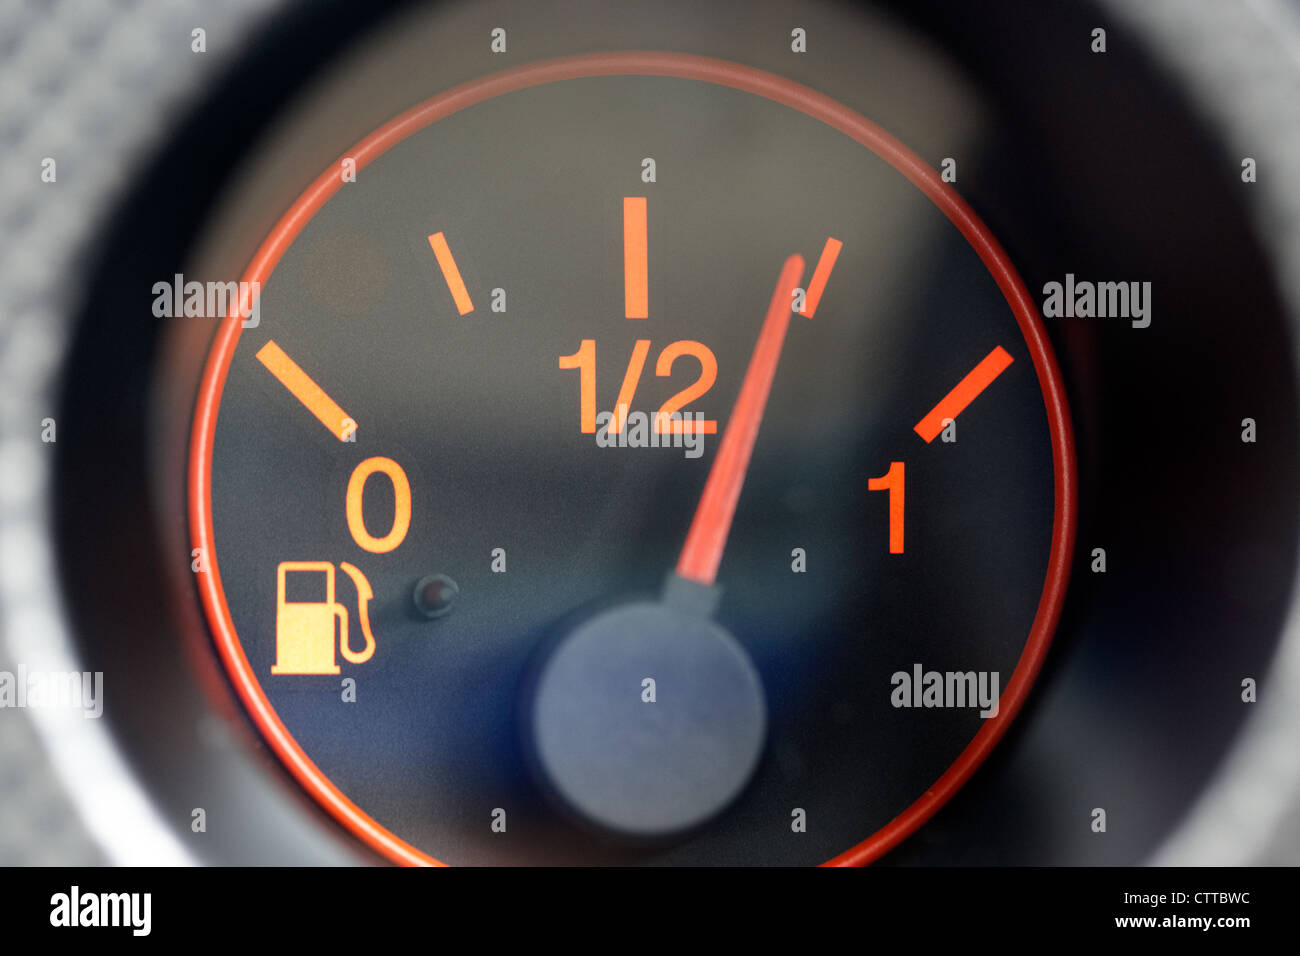 car vehicle fuel gauge showing almost three quarters full Stock Photo